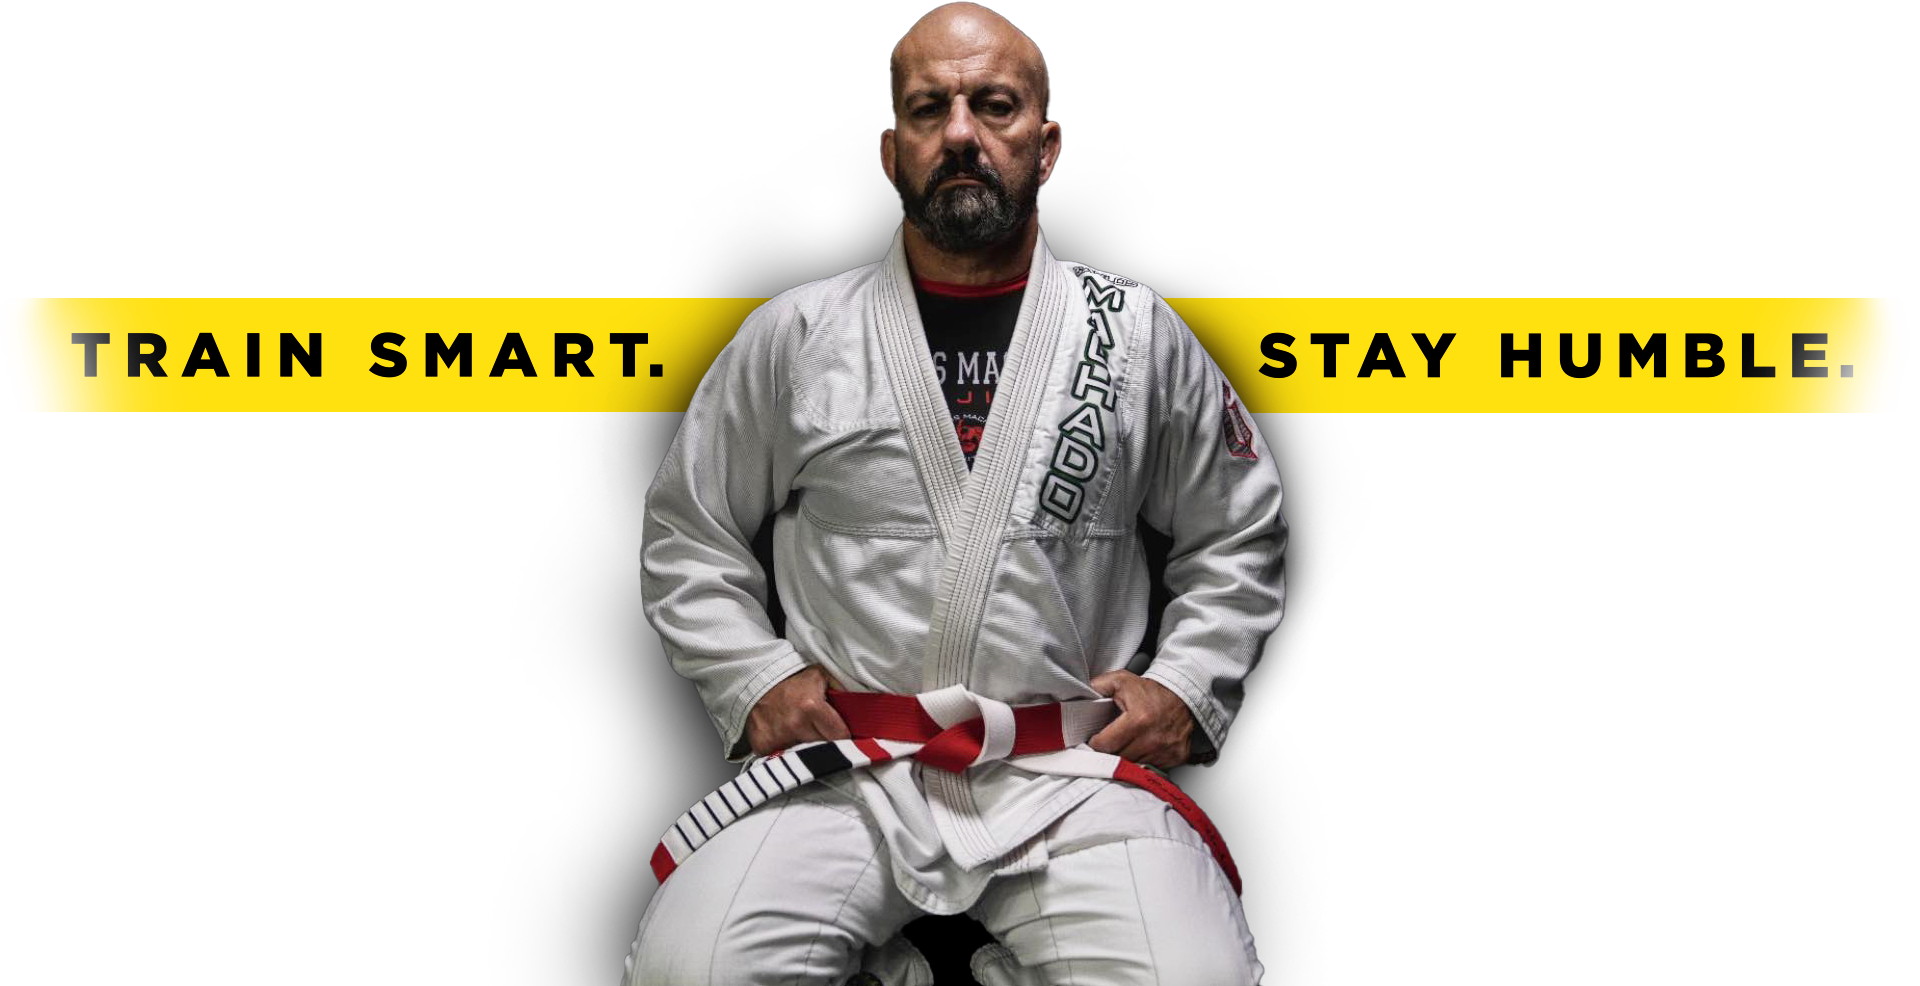 A man in a karate uniform is sitting on a stool with a red belt.